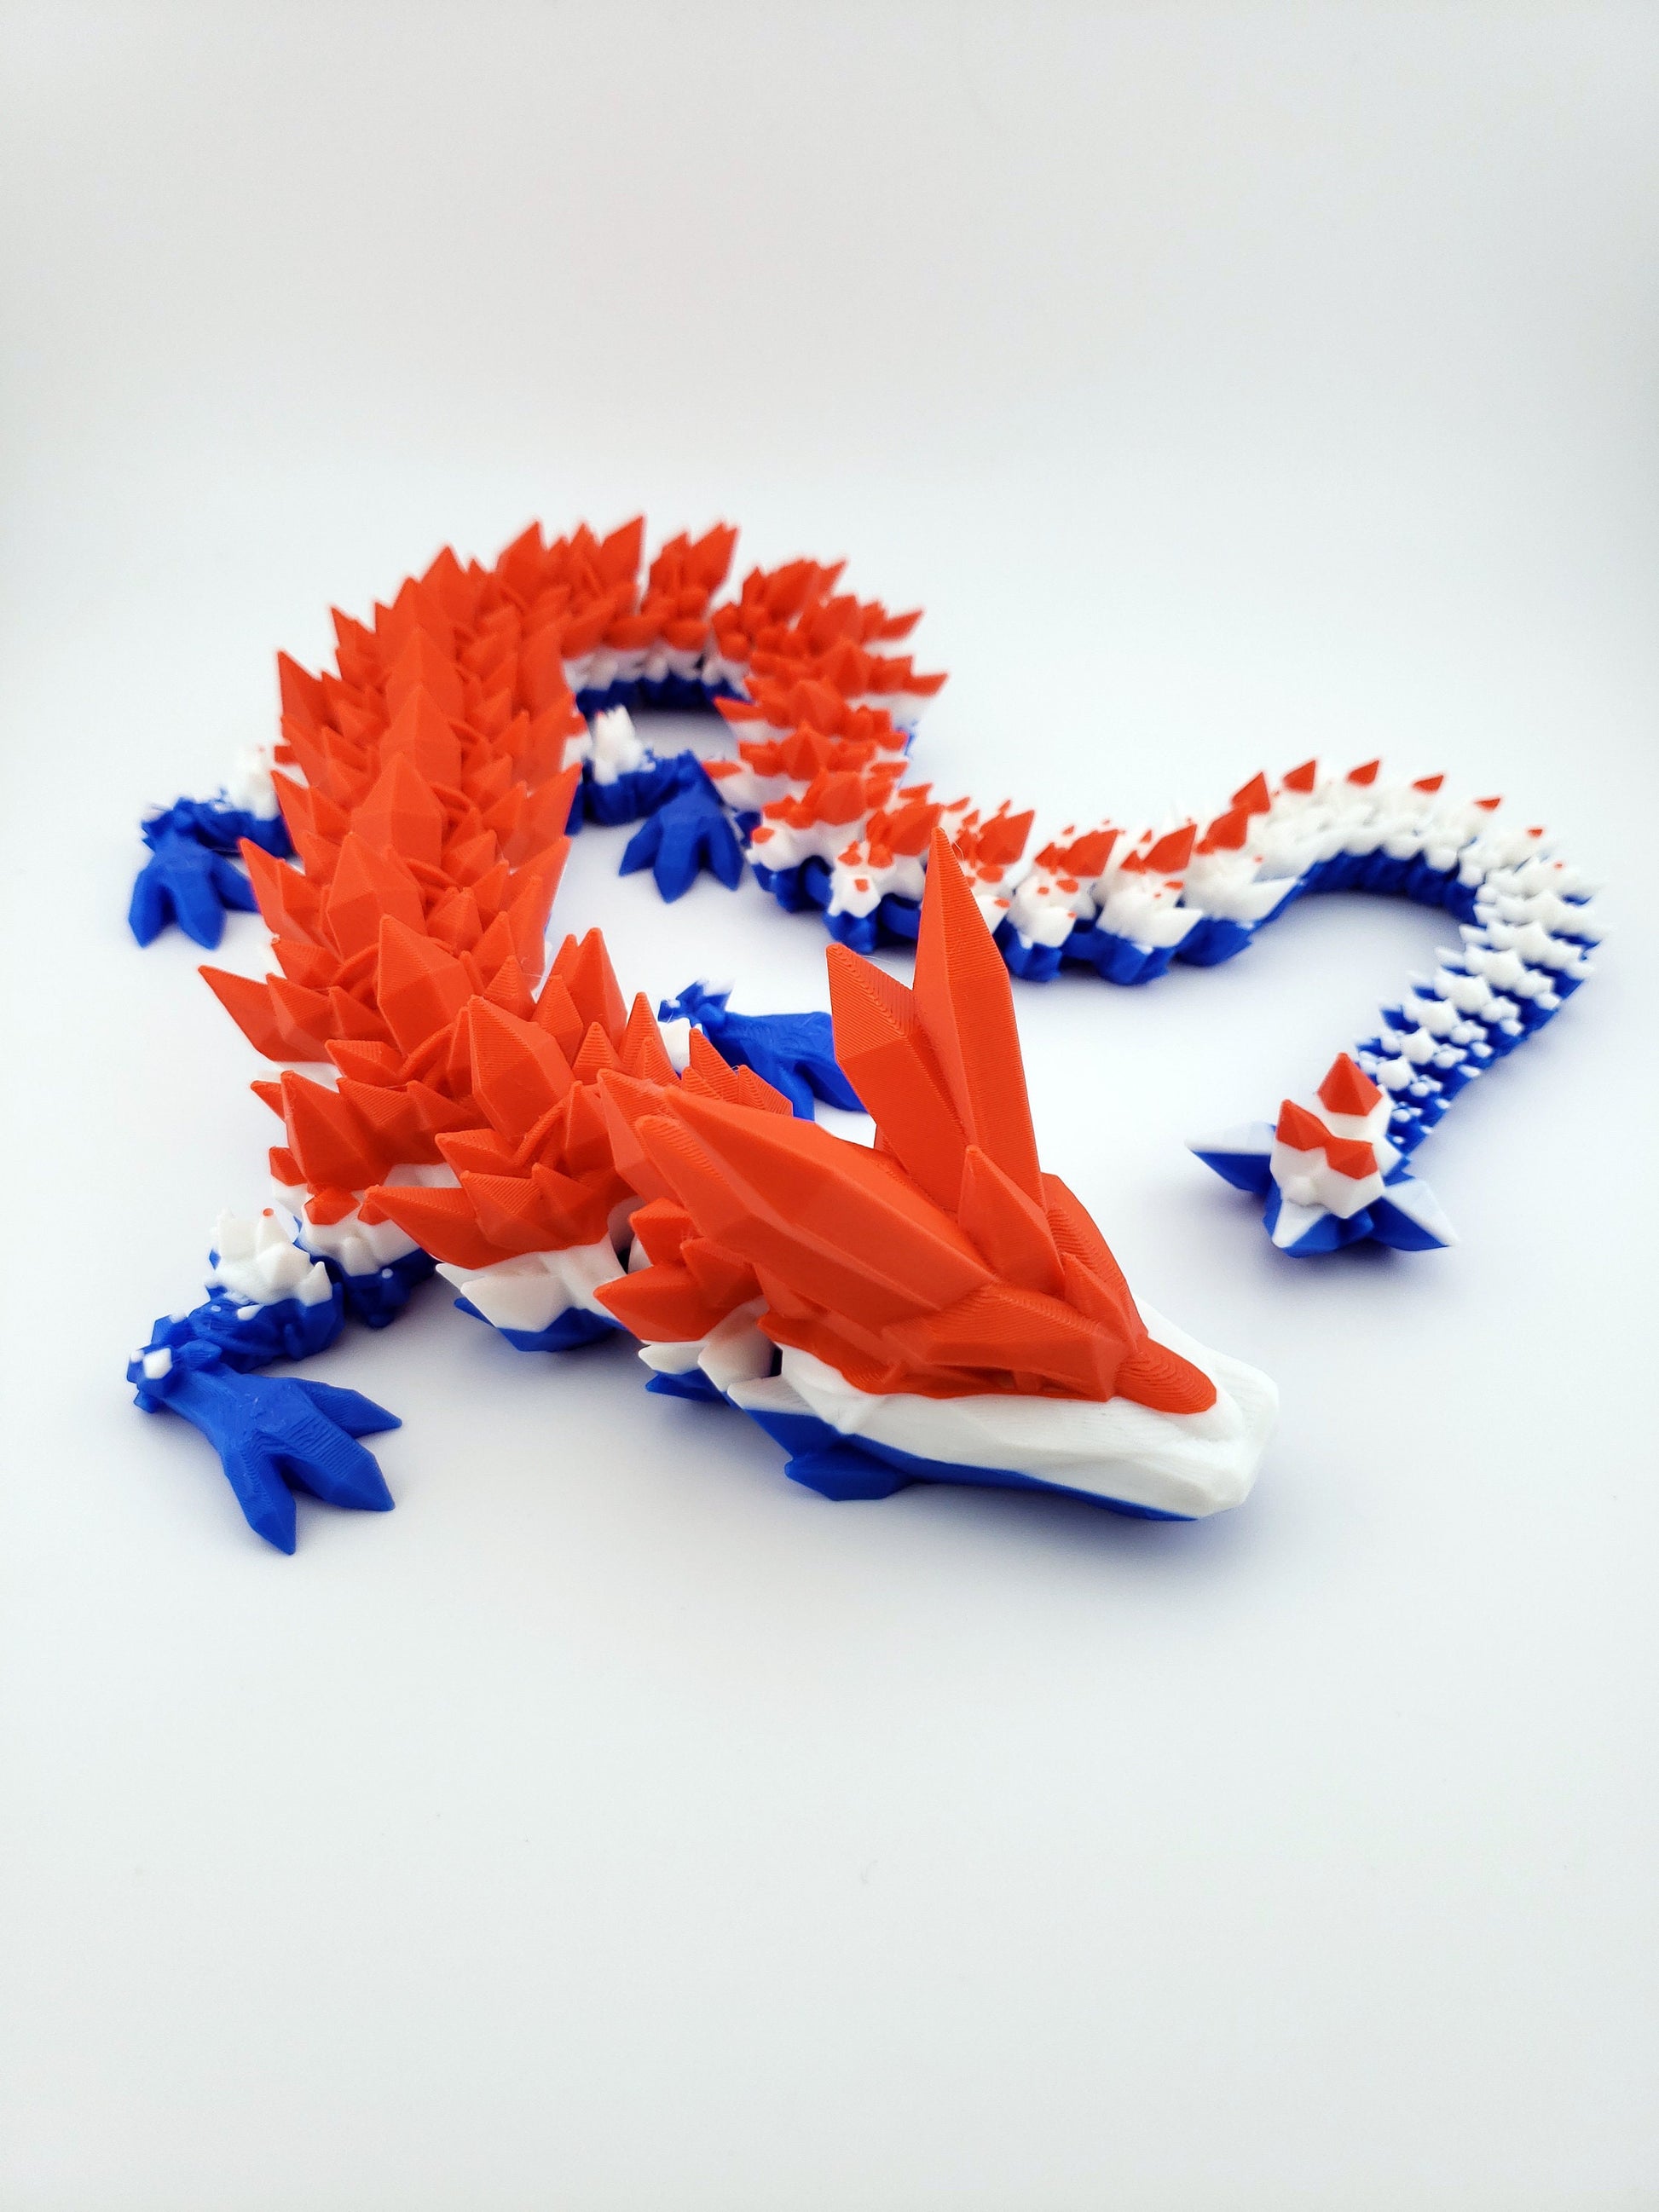 24 Inch Articulated American Flag Crystal Dragon - Sensory Toy - Unique Gift - Stress - Fidget - Patriot 4th Of July - Red, White and Blue